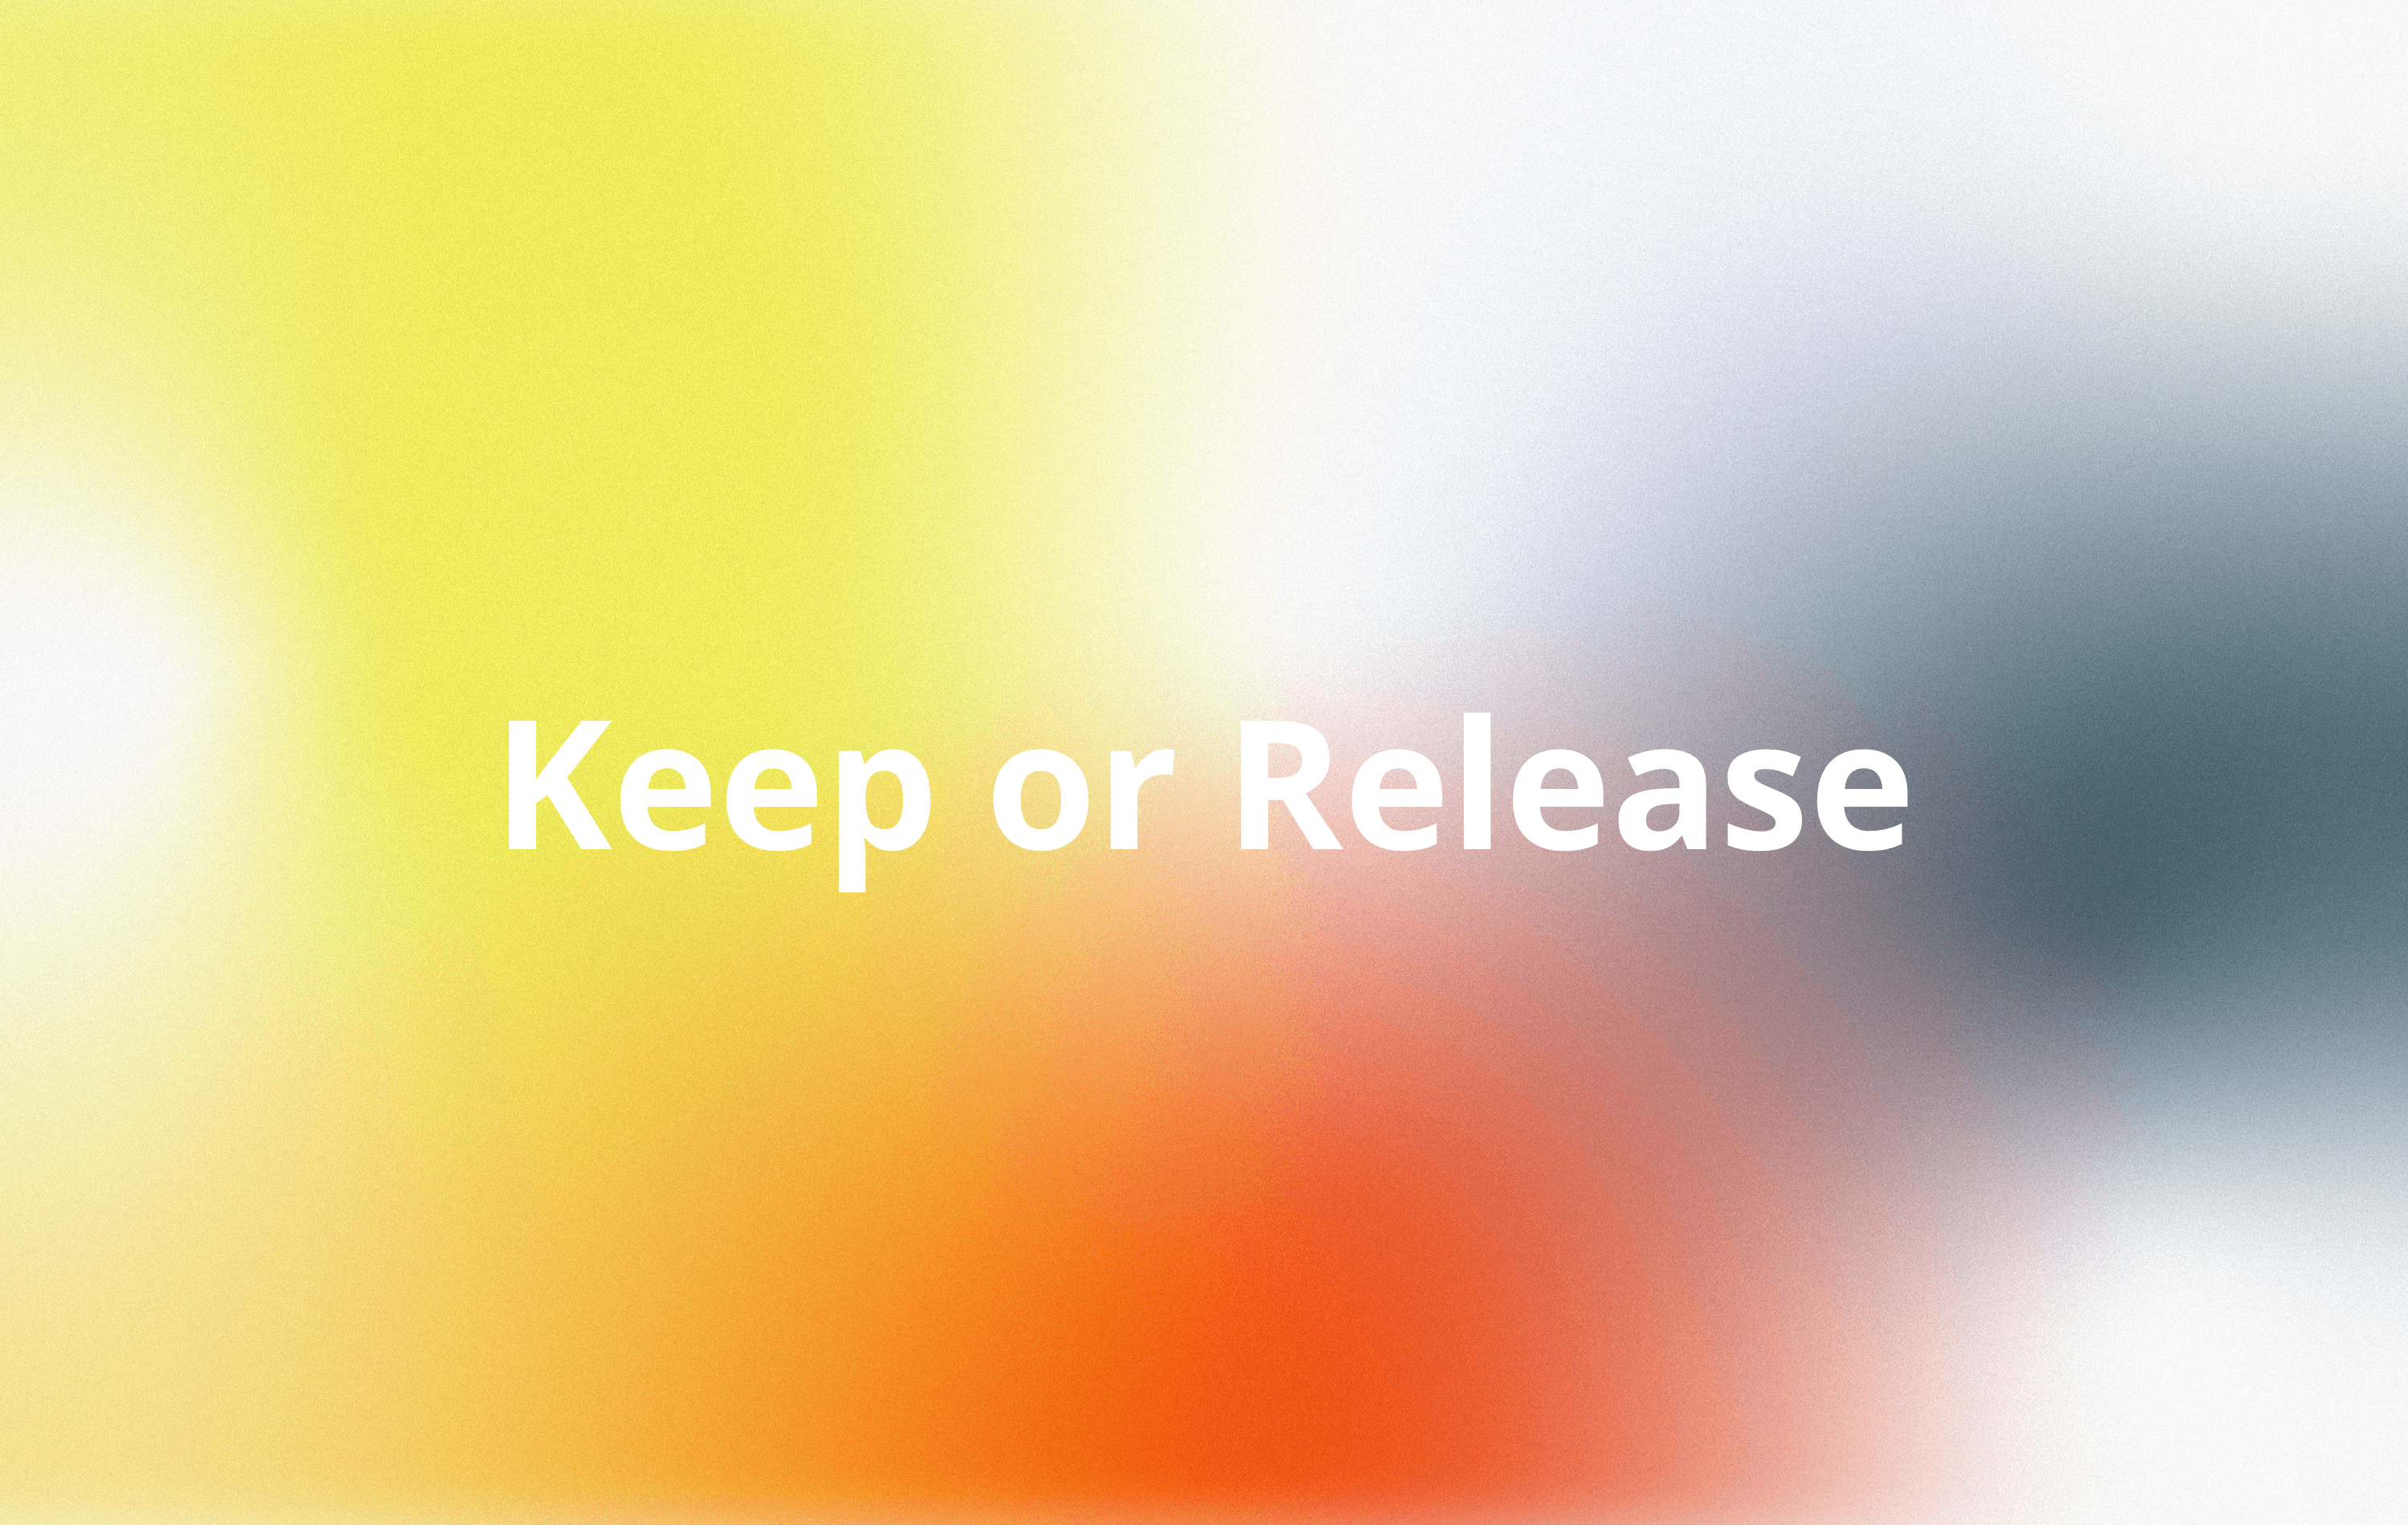 Keep or Release